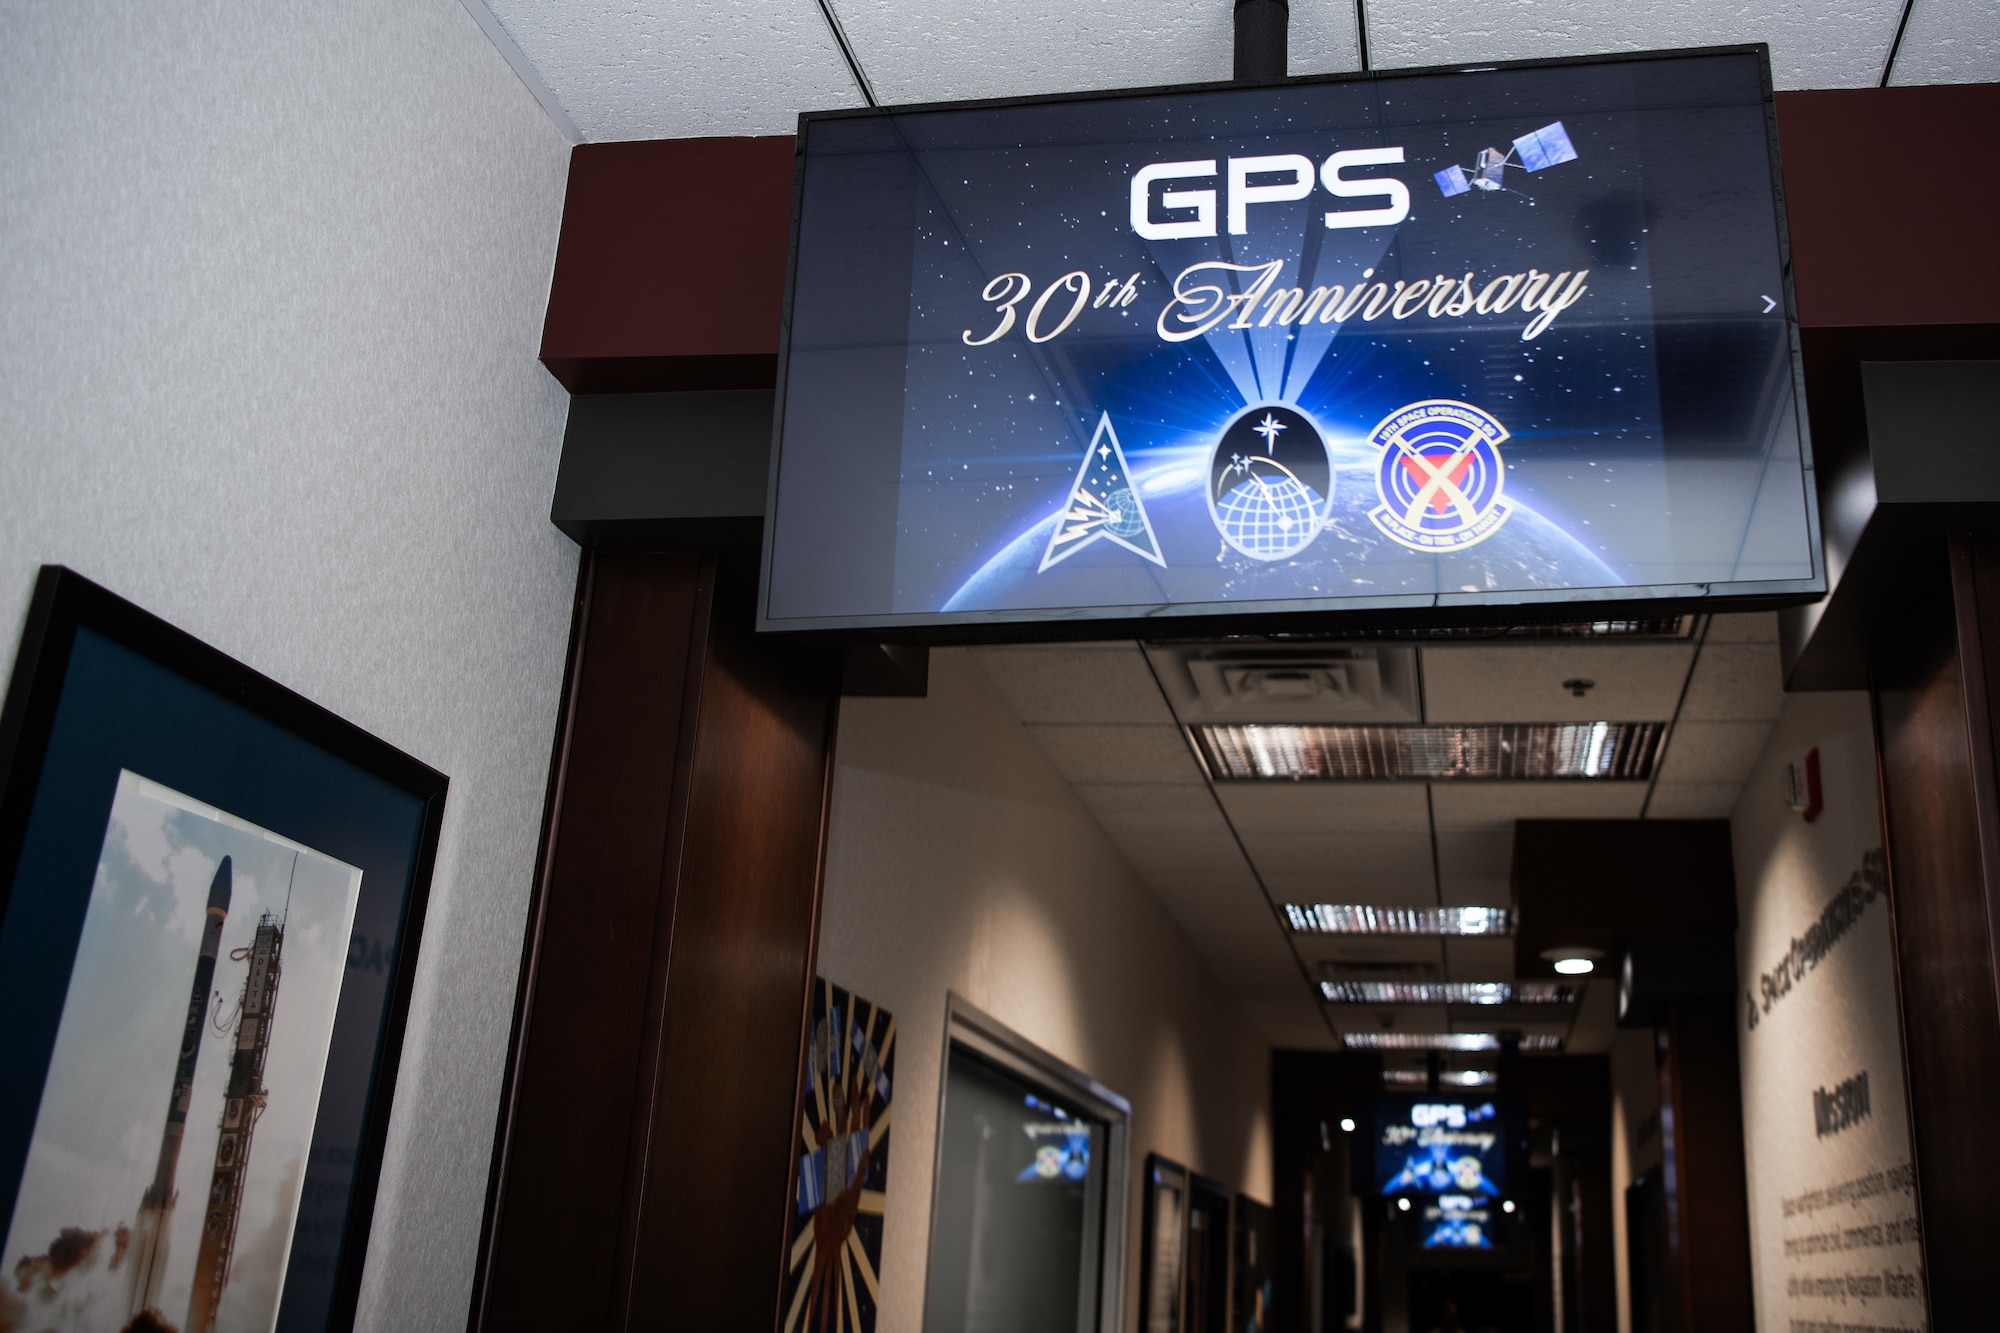 Television displaying GPS 30th Anniversary graphic.